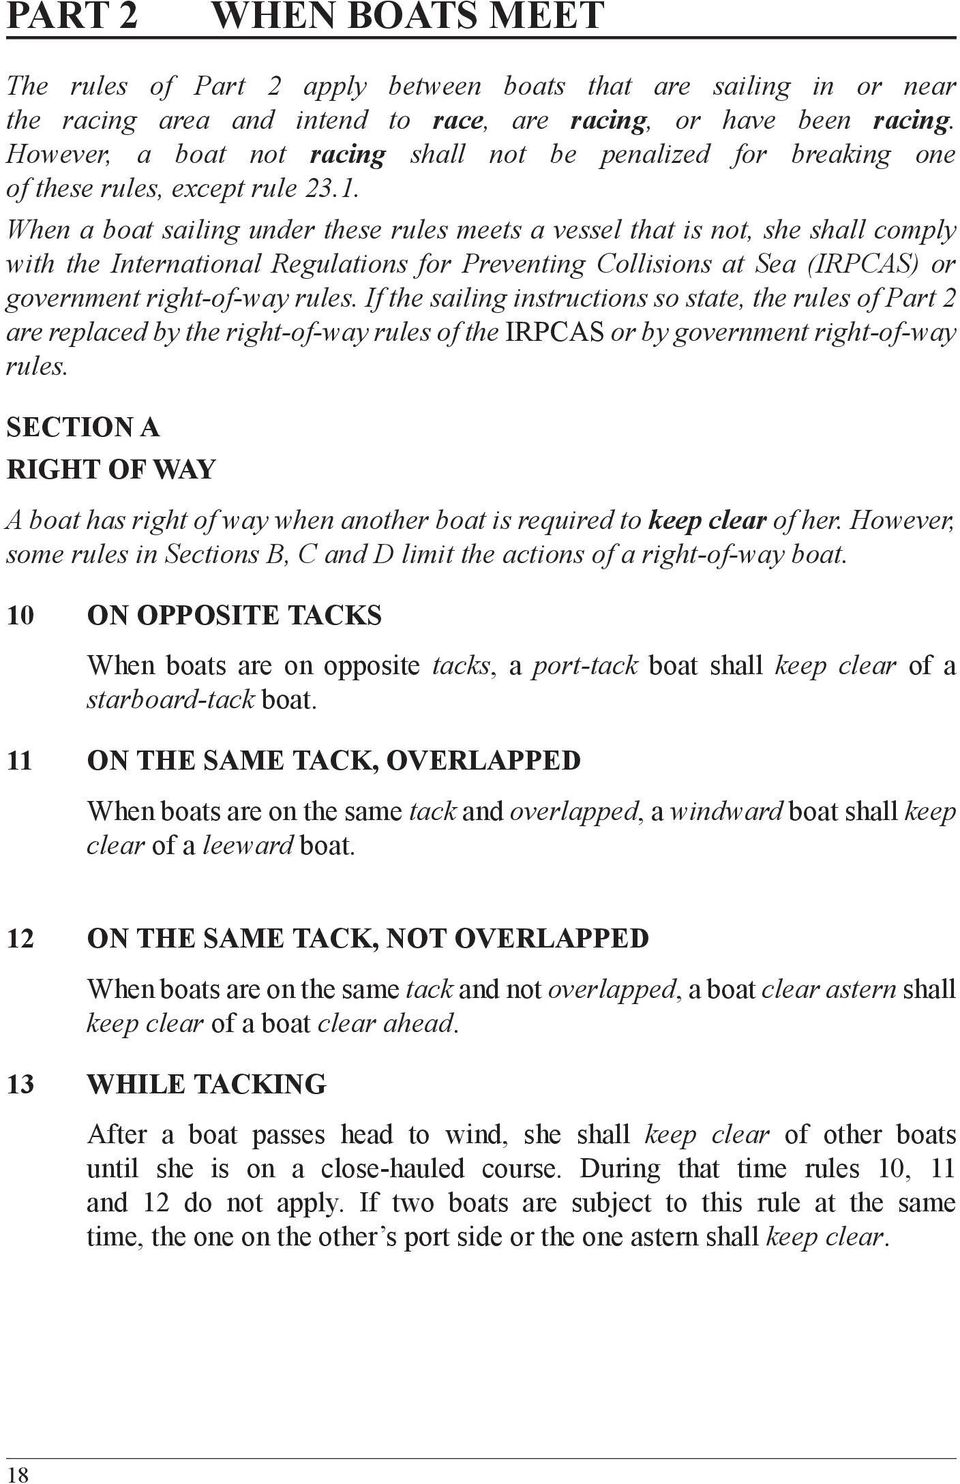 When a boat sailing under these rules meets a vessel that is not, she shall comply with the International Regulations for Preventing Collisions at Sea (IRPCAS) or government right-of-way rules.